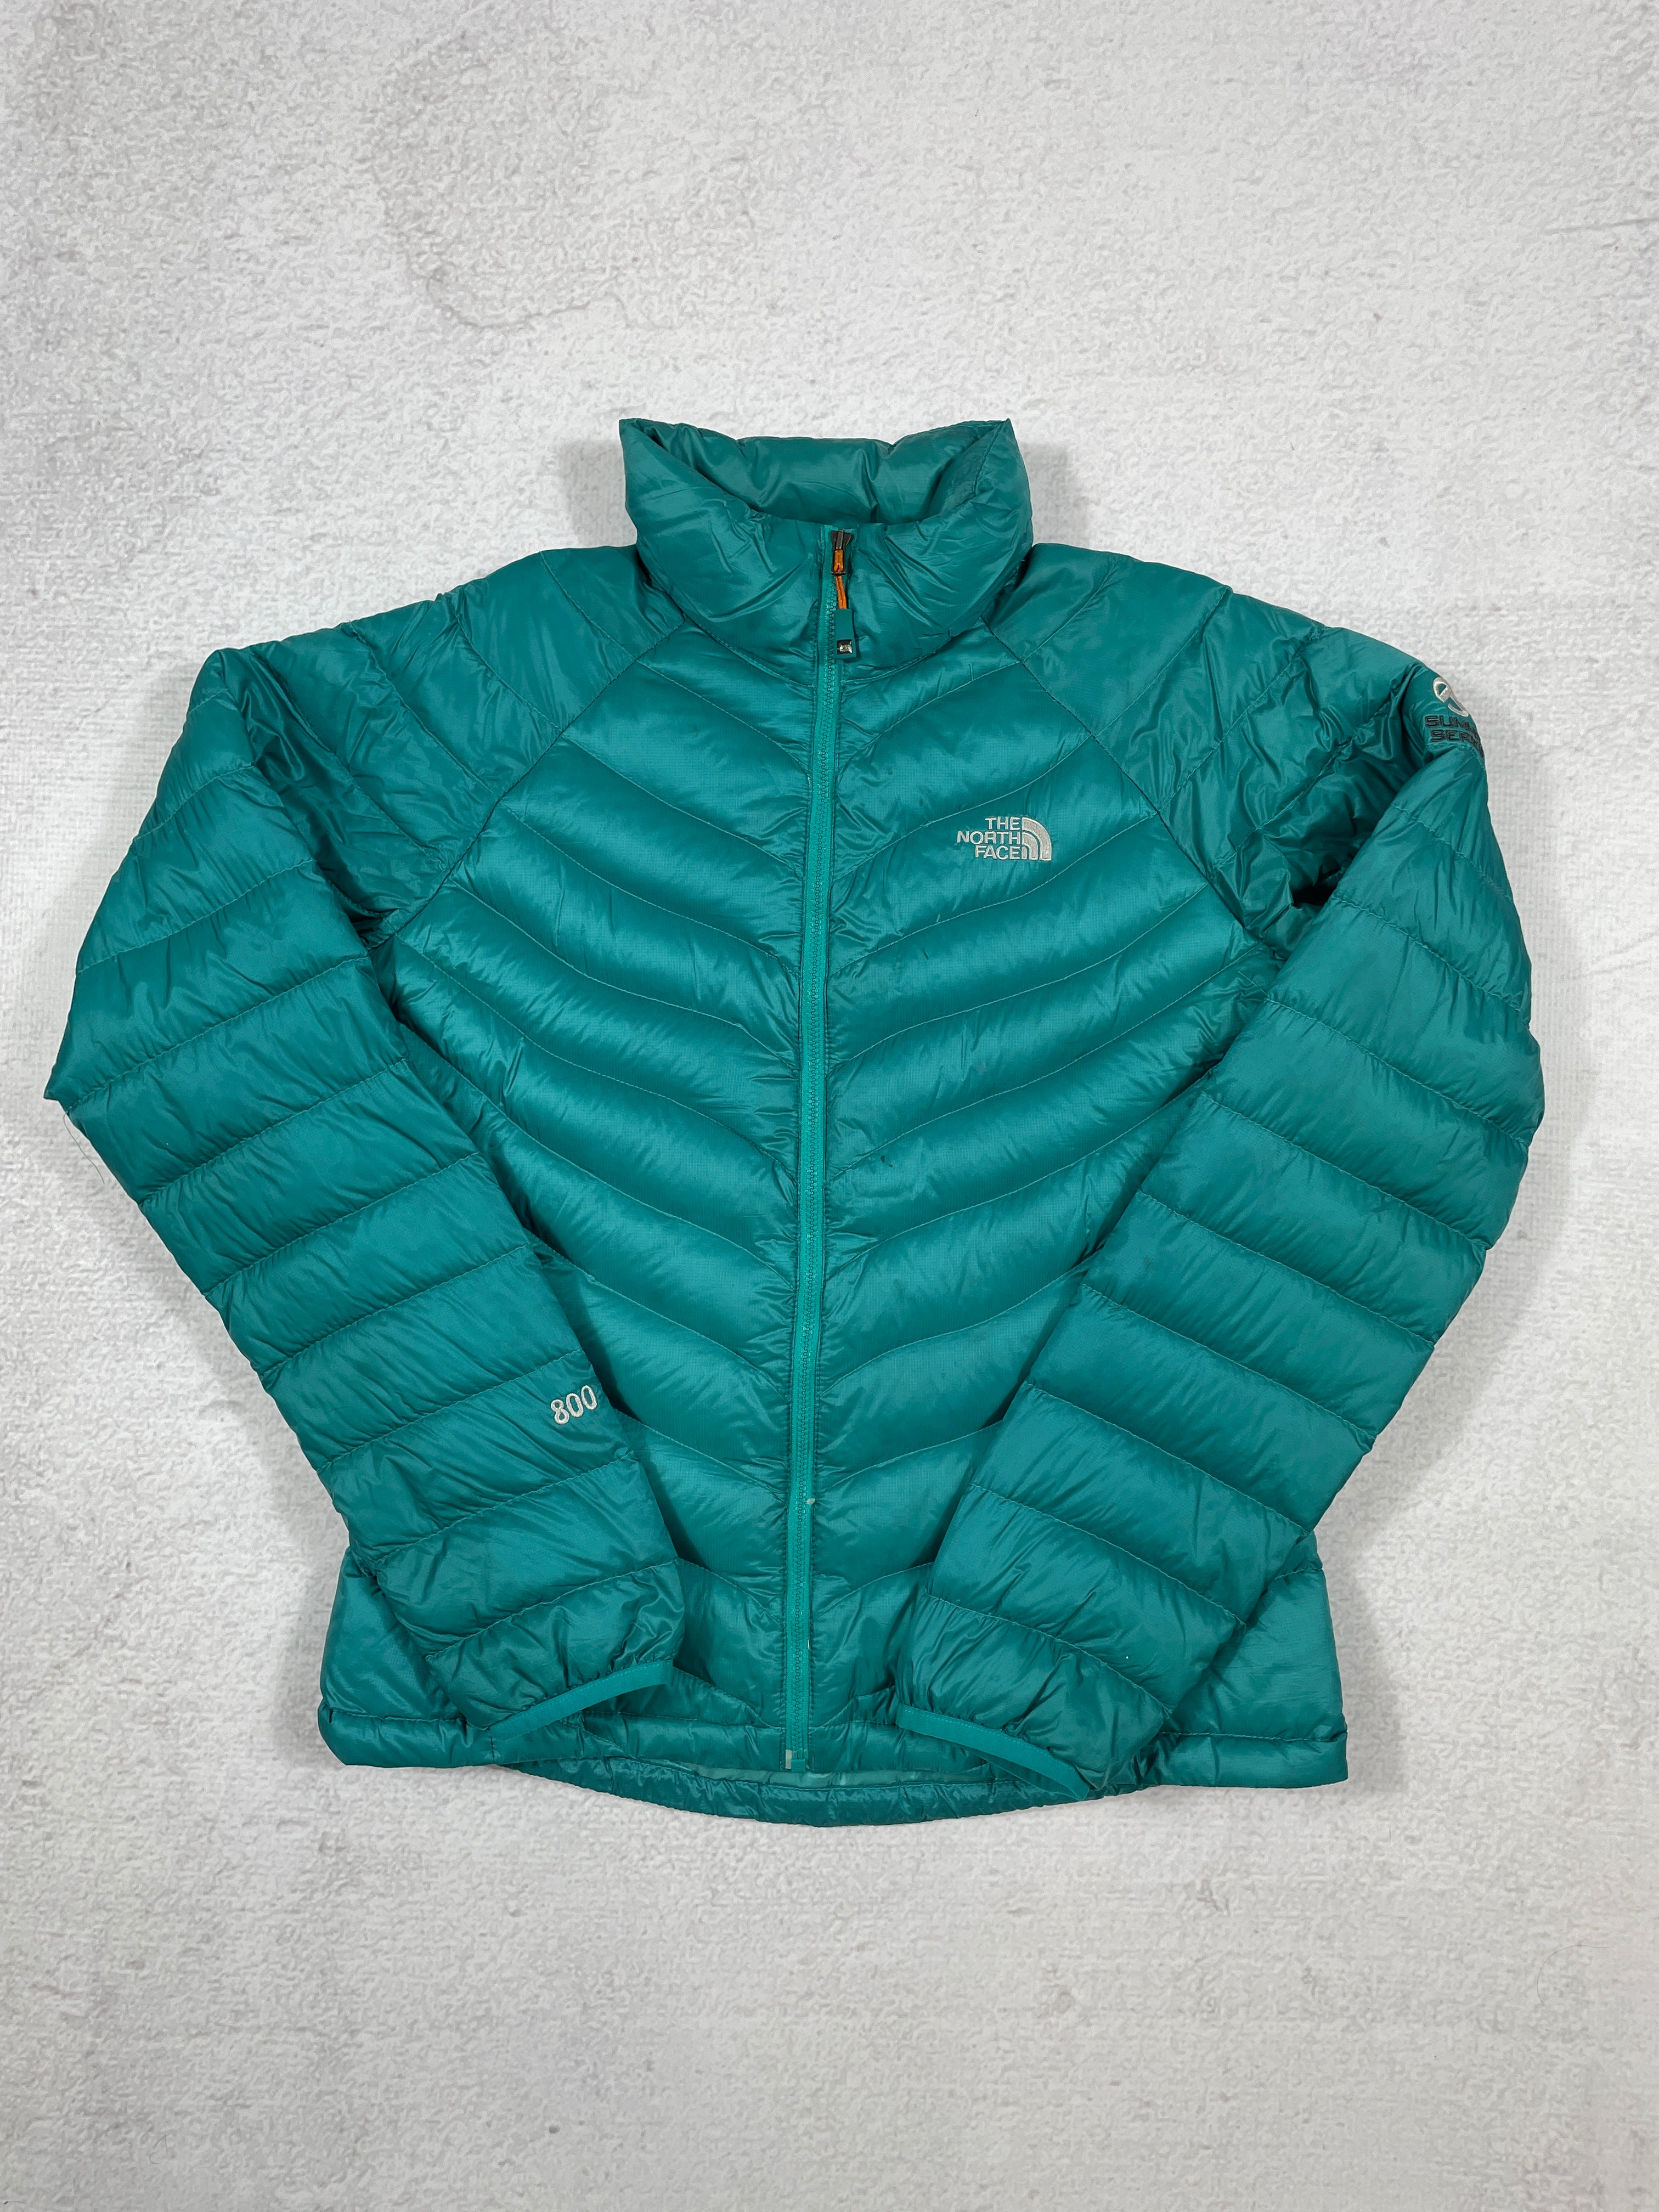 Vintage The North Face 800 Series Puffer Jacket - Women's Small